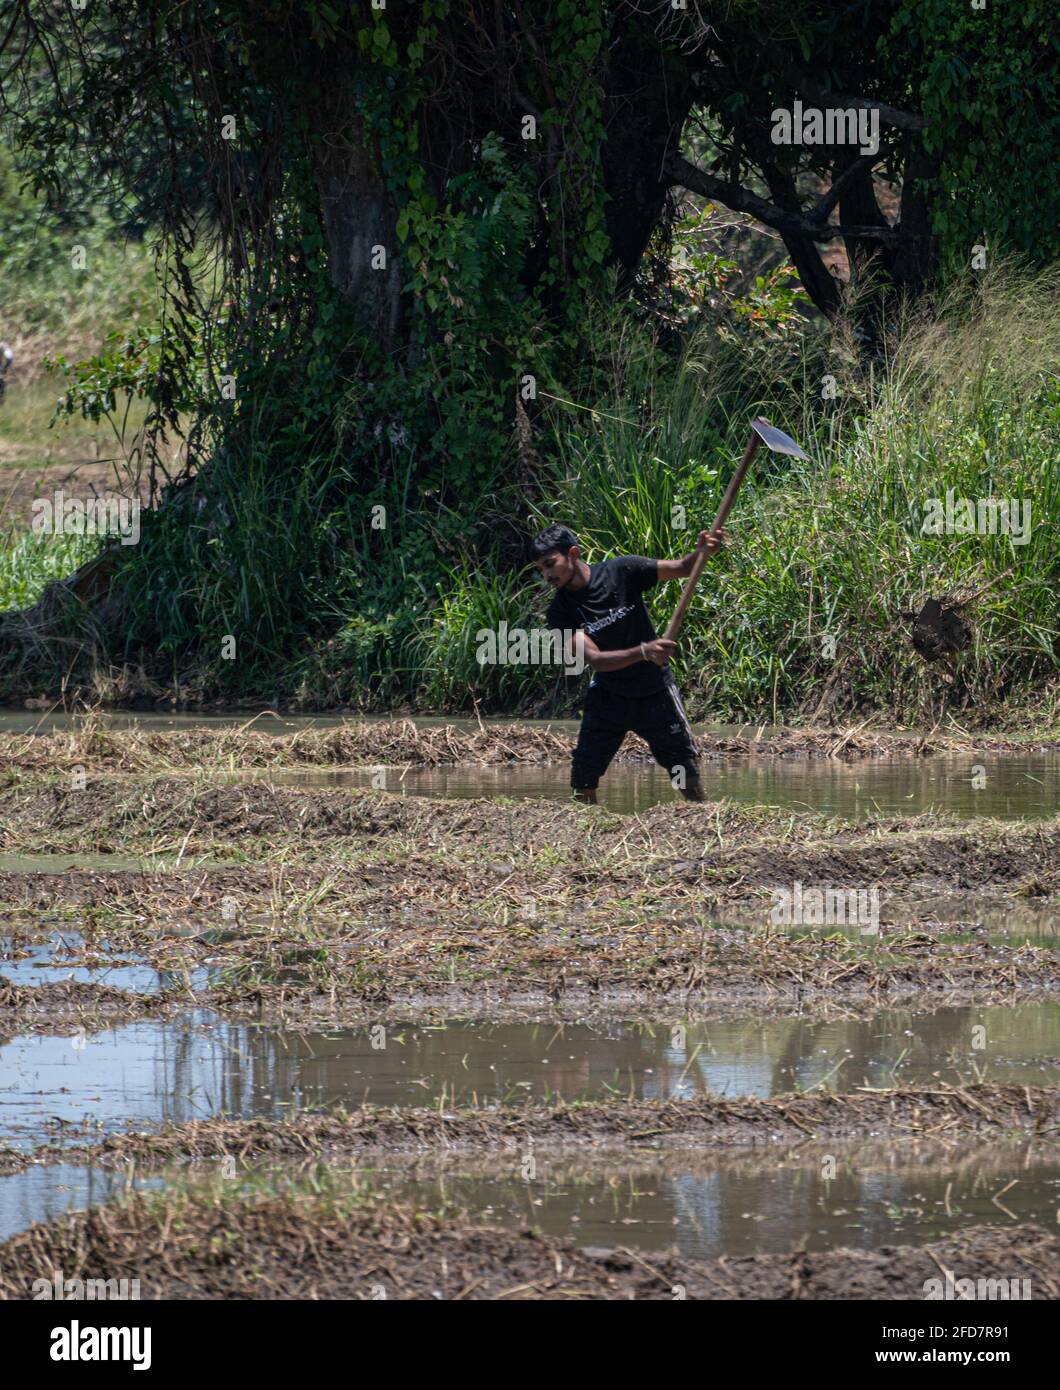 Anuradhapura, Sri Lanka - 03 30 2021: Male farmer hand plowing the paddy field with an agricultural hoe. Stock Photo